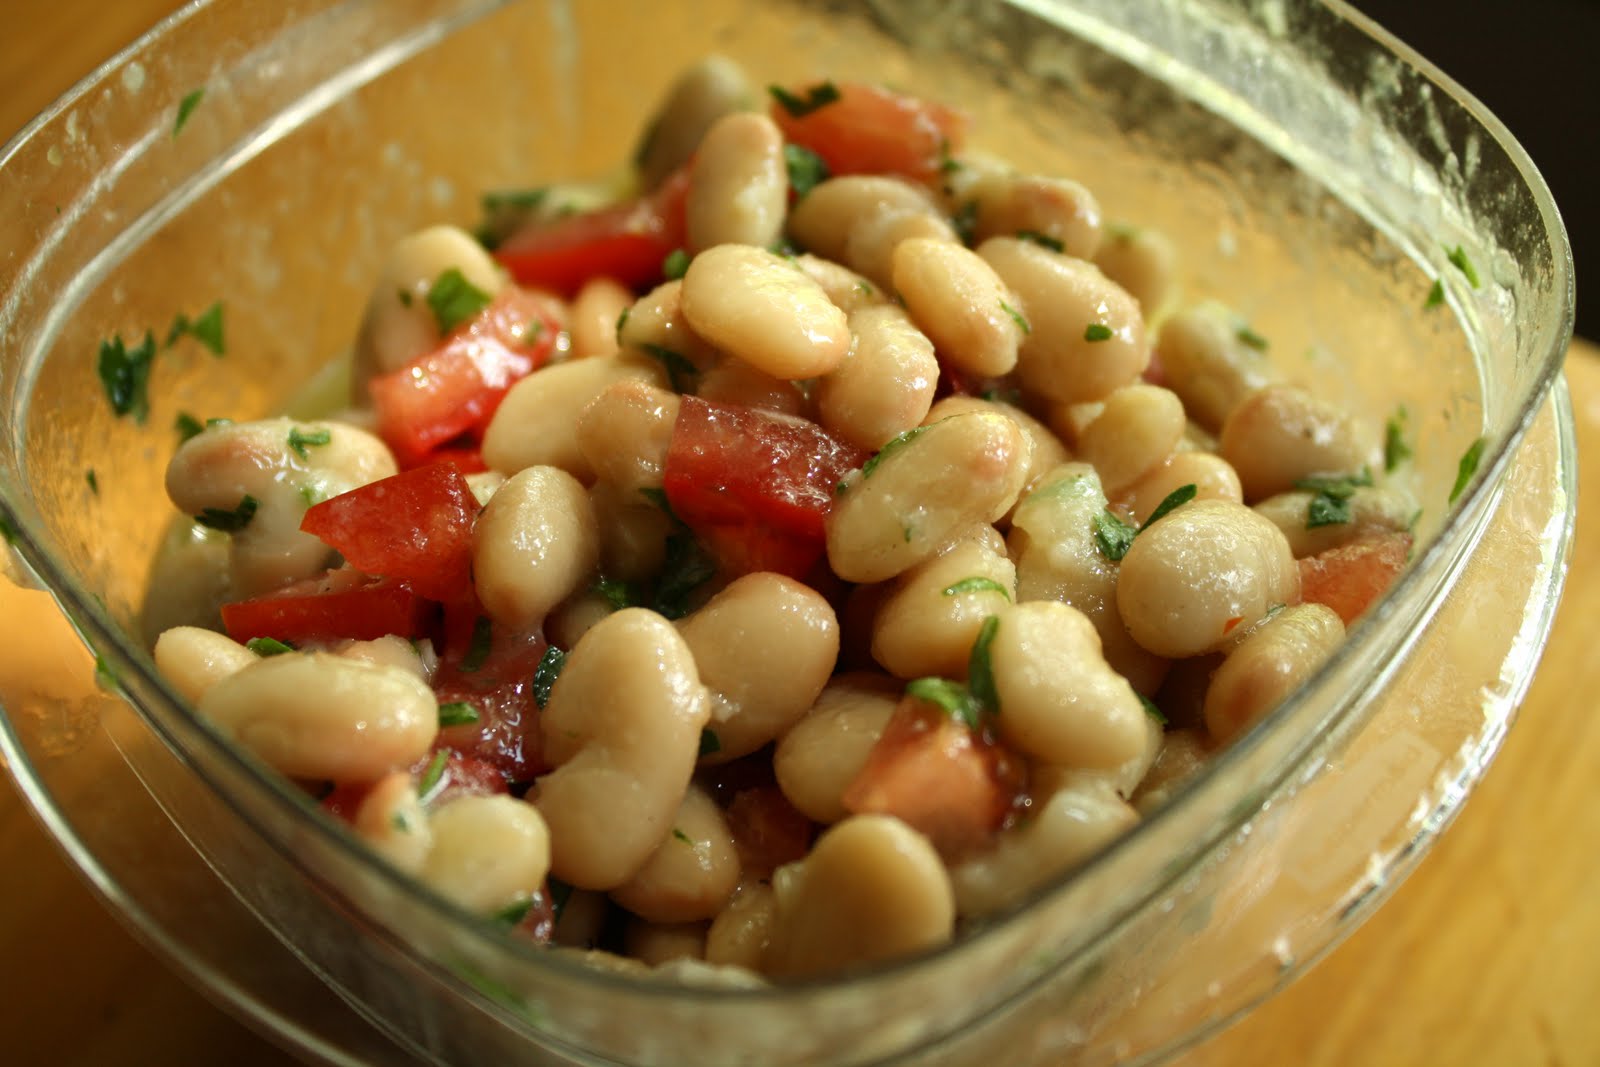 Artistic Eatables: Marinated White Beans with Tomatoes